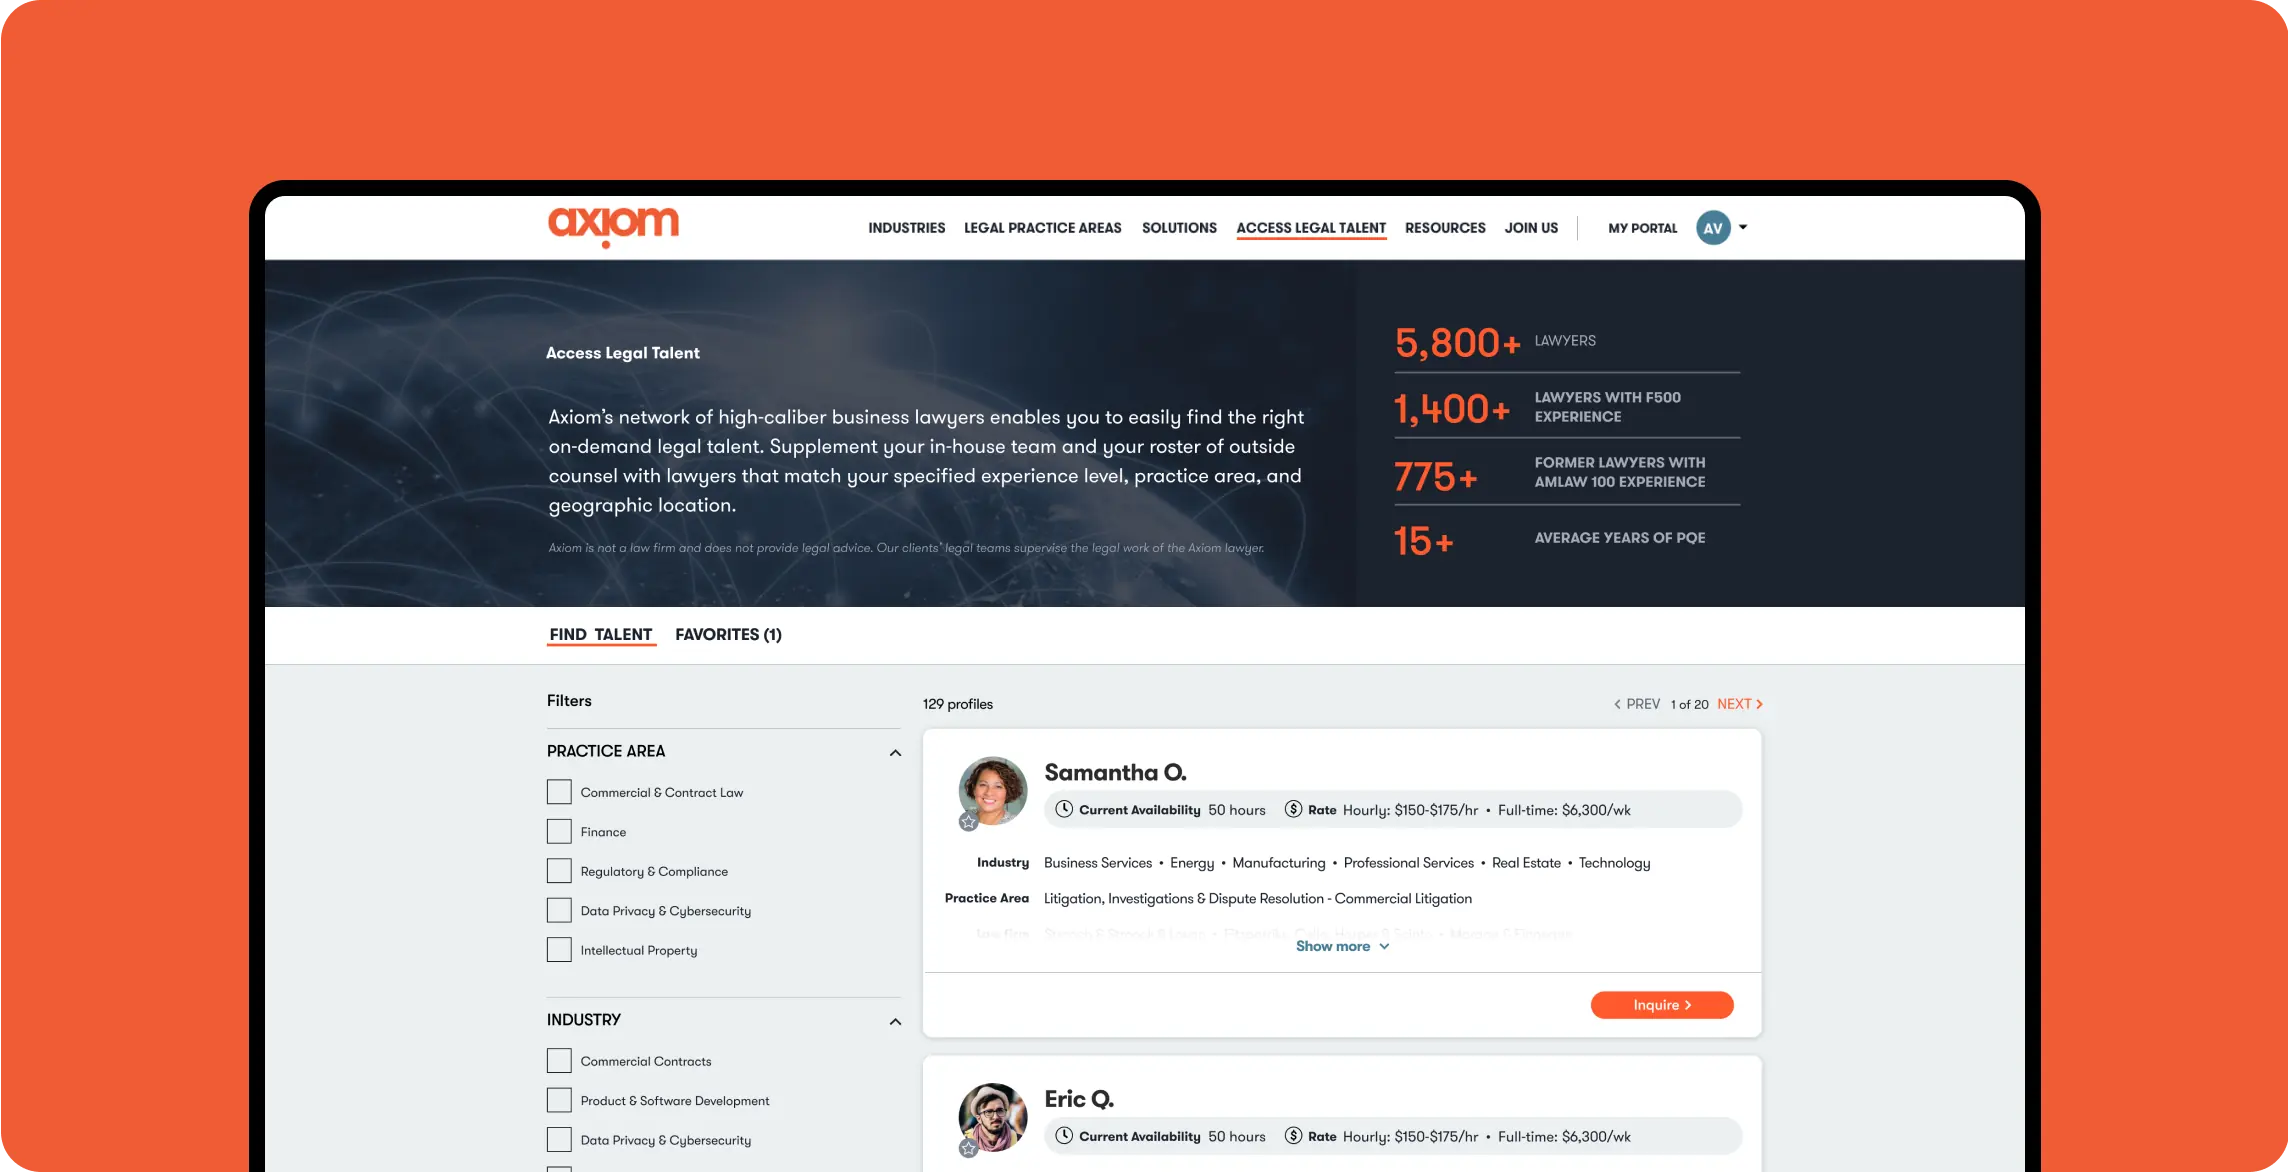 The 'find talent' section of the Axiom site, which makes finding and reaching legal talent easy and seamless.